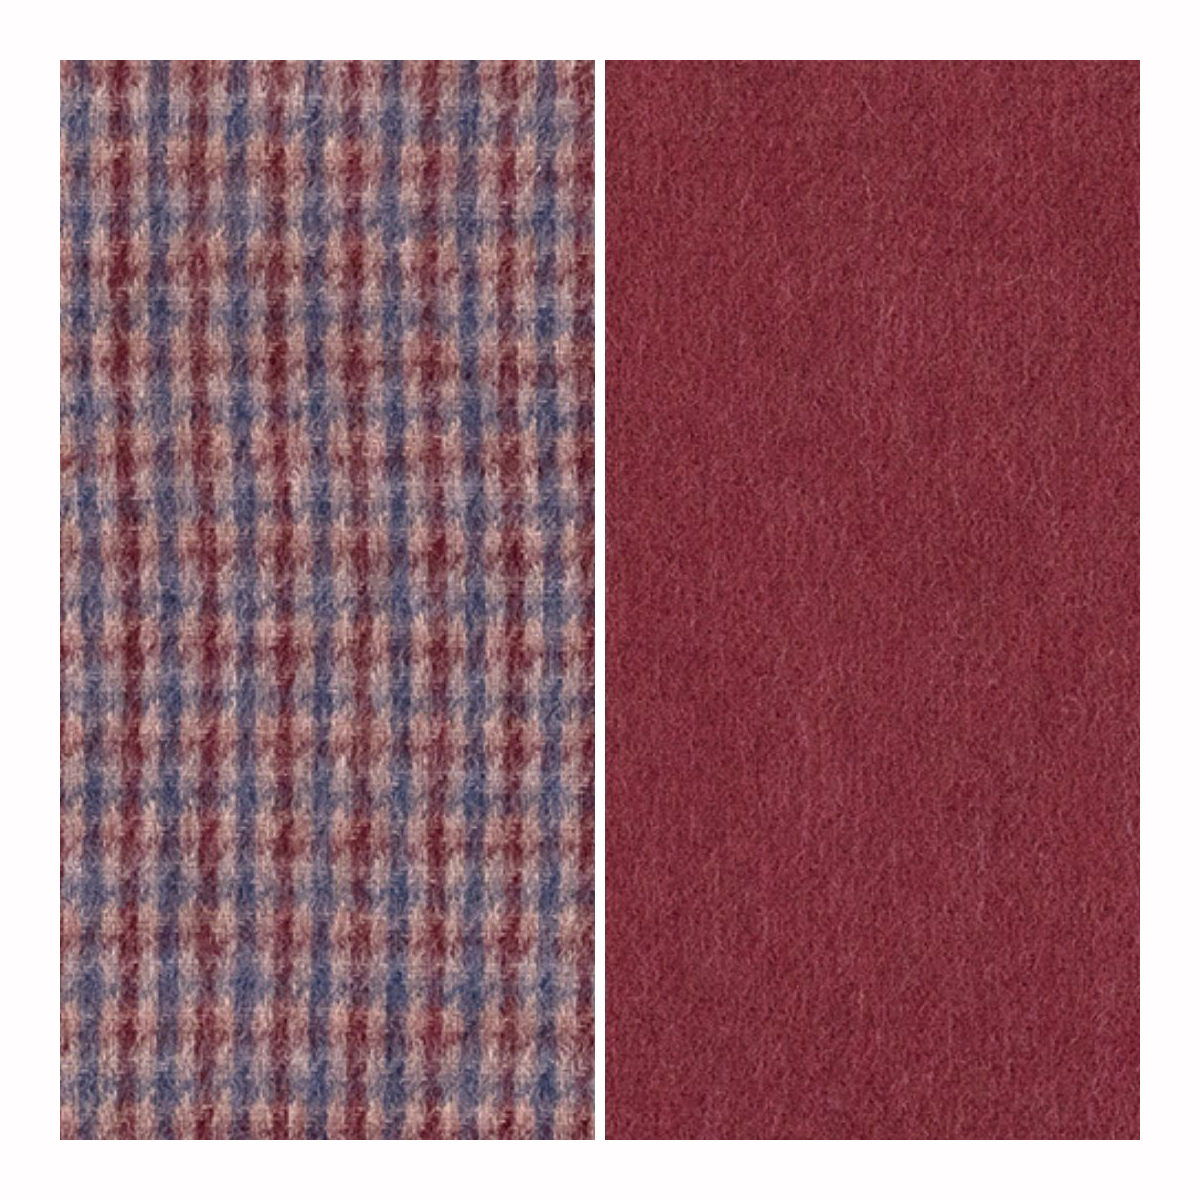 Claret & Beige Double Faced 100% Cashmere Scalf  Robert Old   